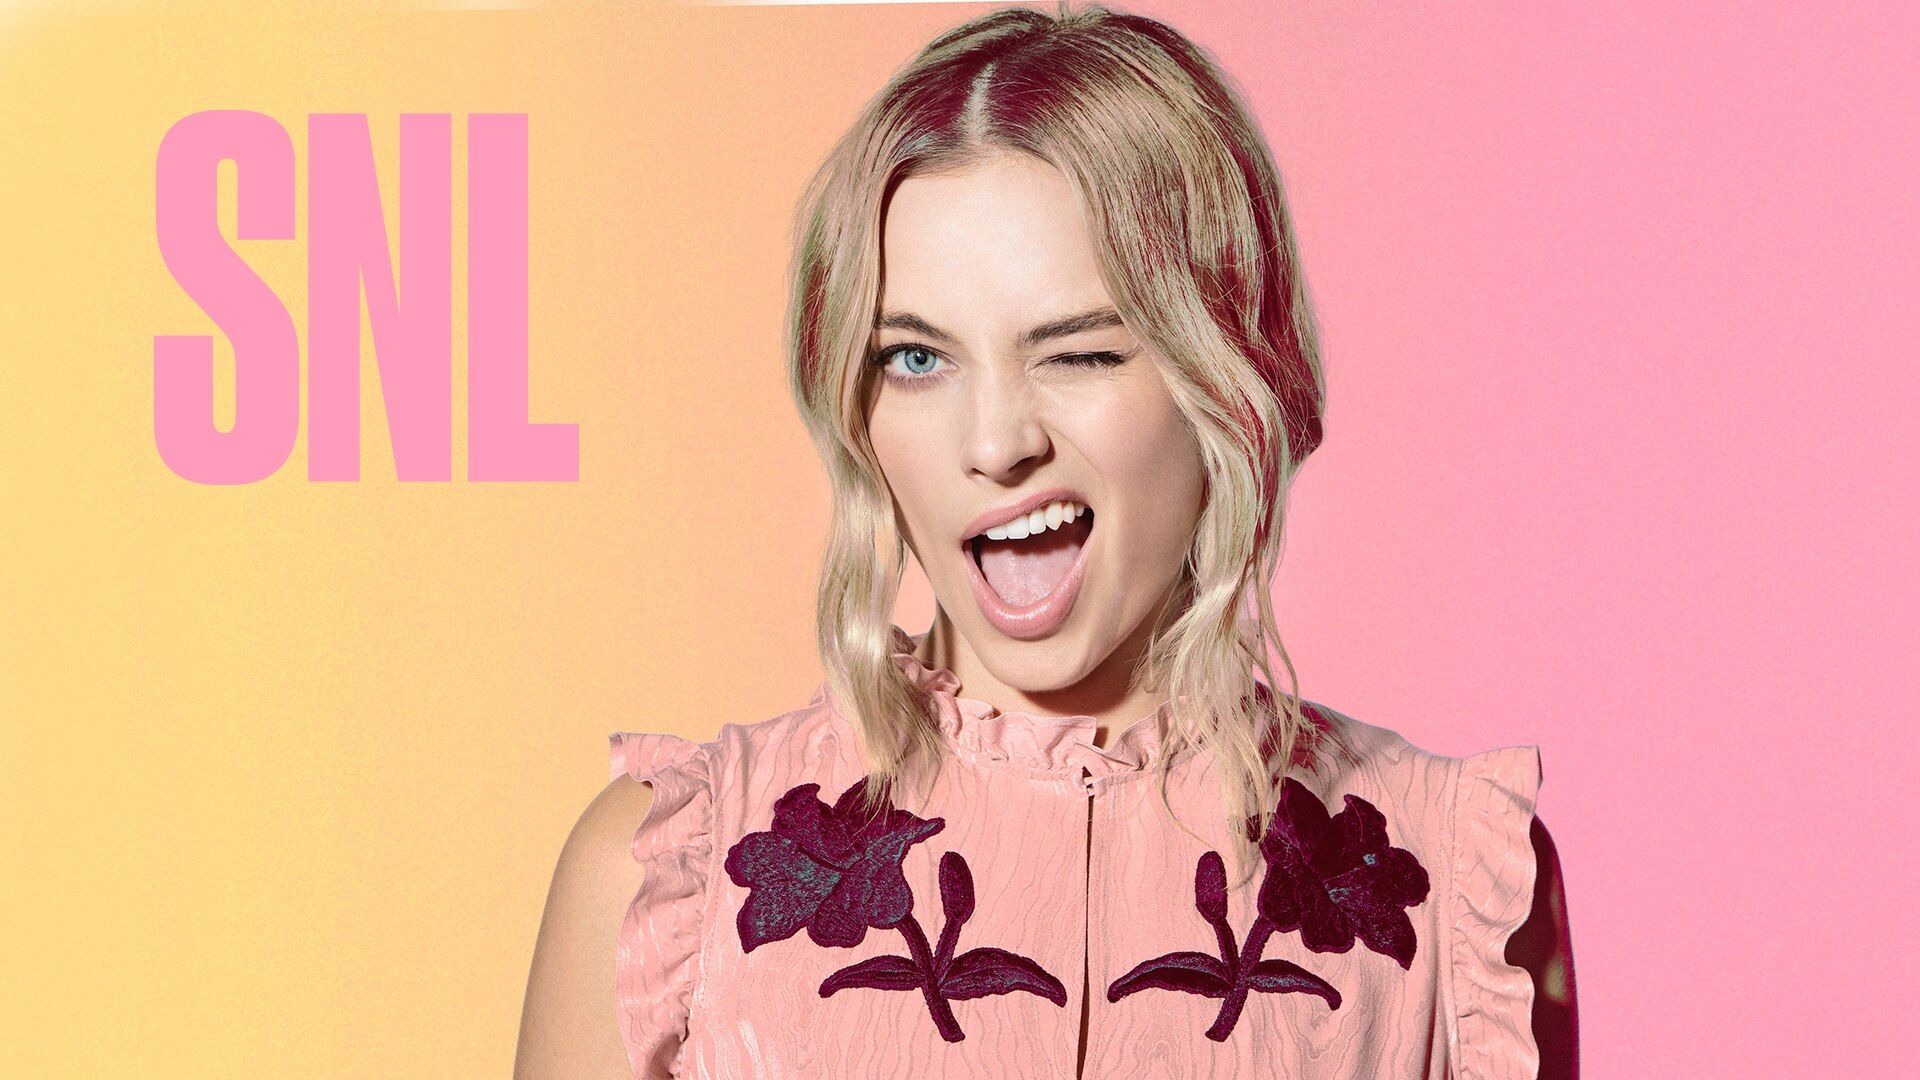 Saturday Night Live: Margot Robbie and The Weeknd Bumper Photo Photo: 2928640